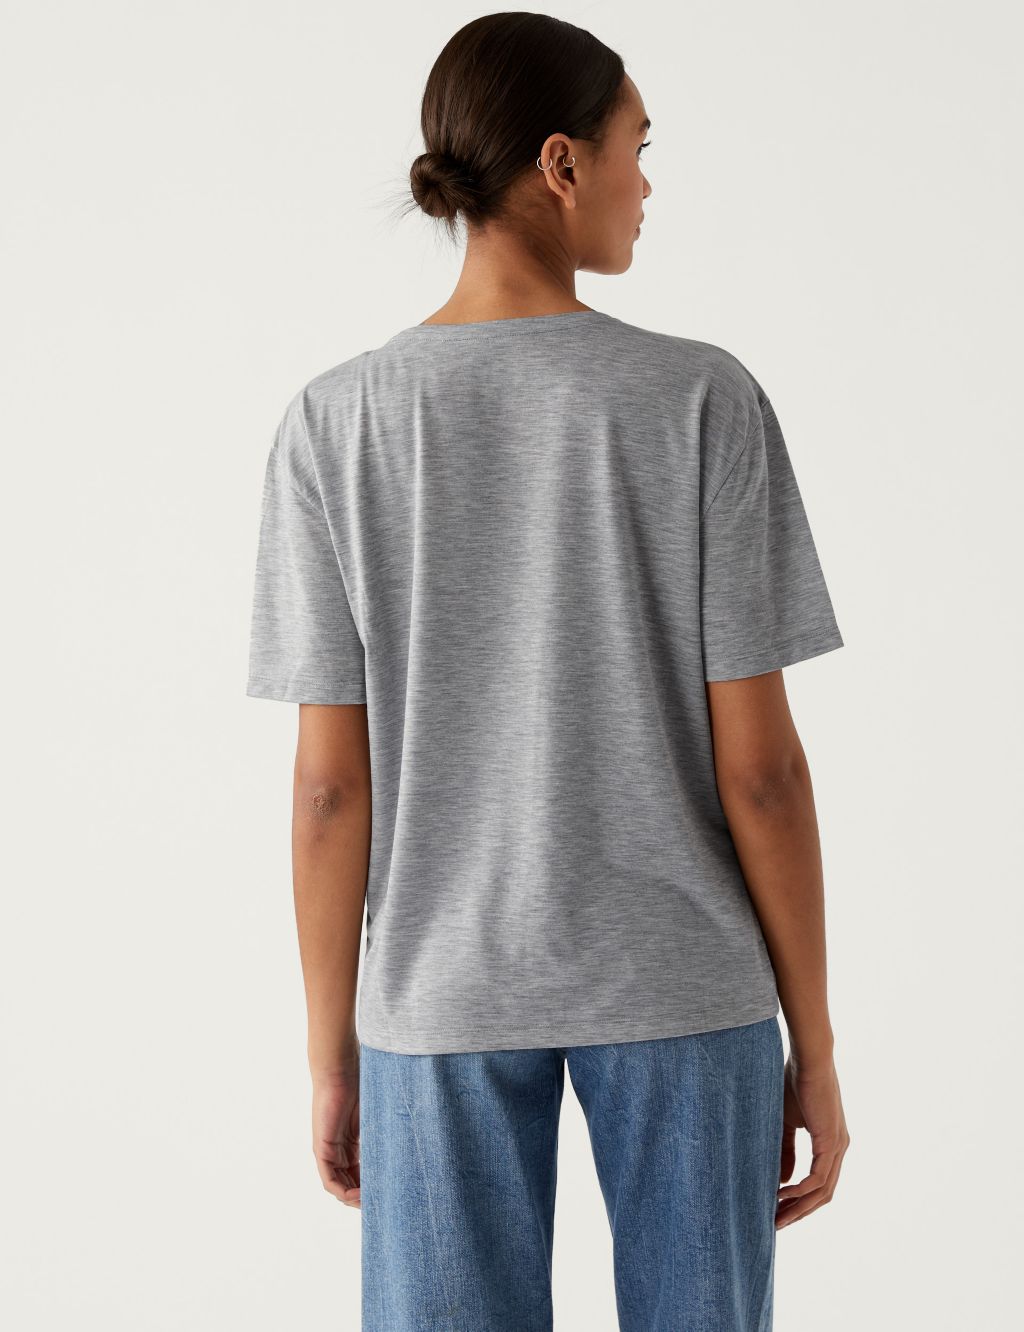 Crew Neck Relaxed T-Shirt image 3